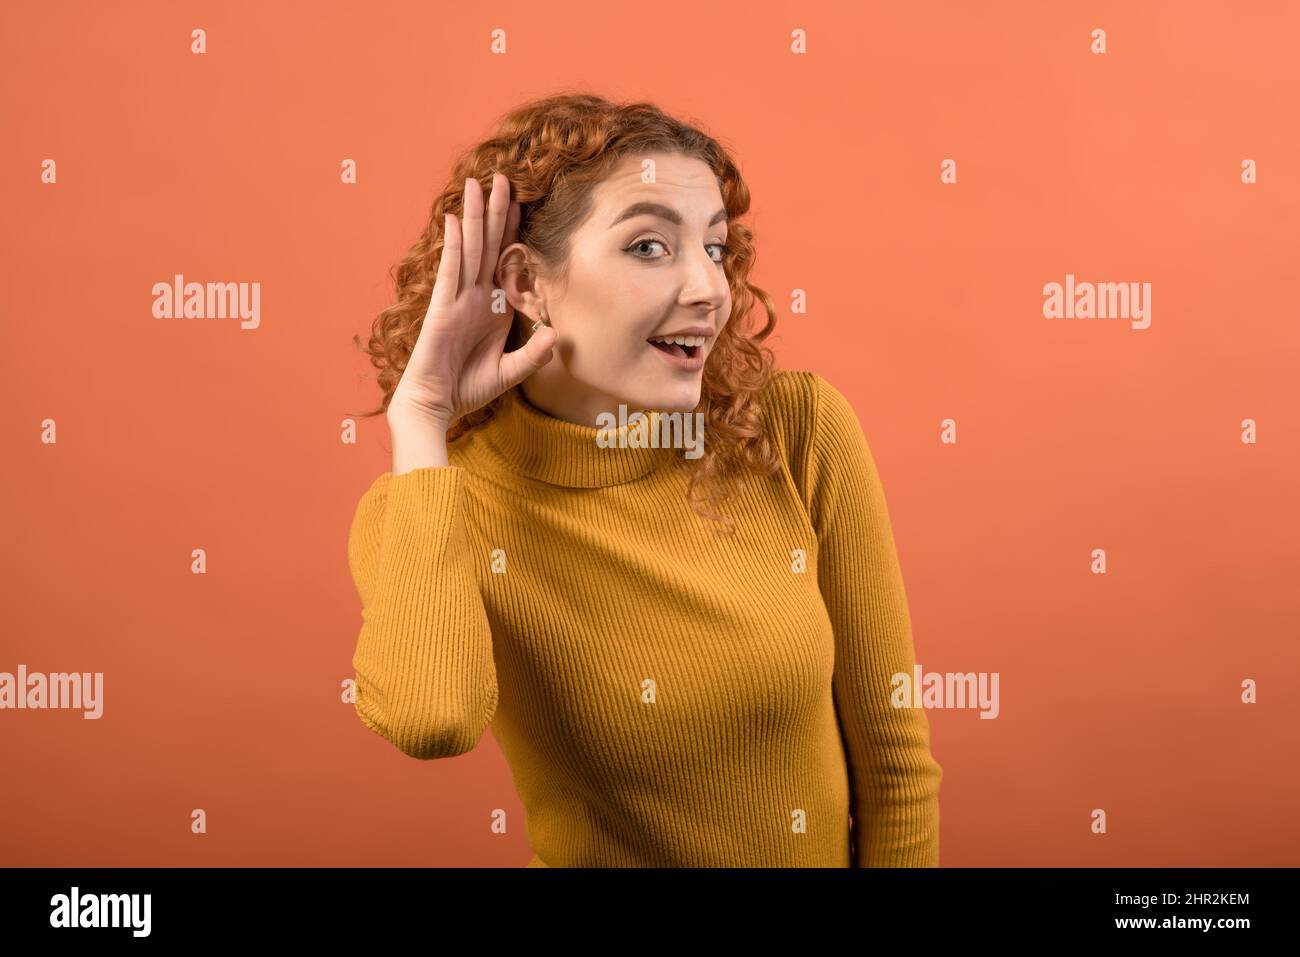 Adorable baby girl with red head band looking towards camera and smiling.  Health concept Stock Photo - Alamy